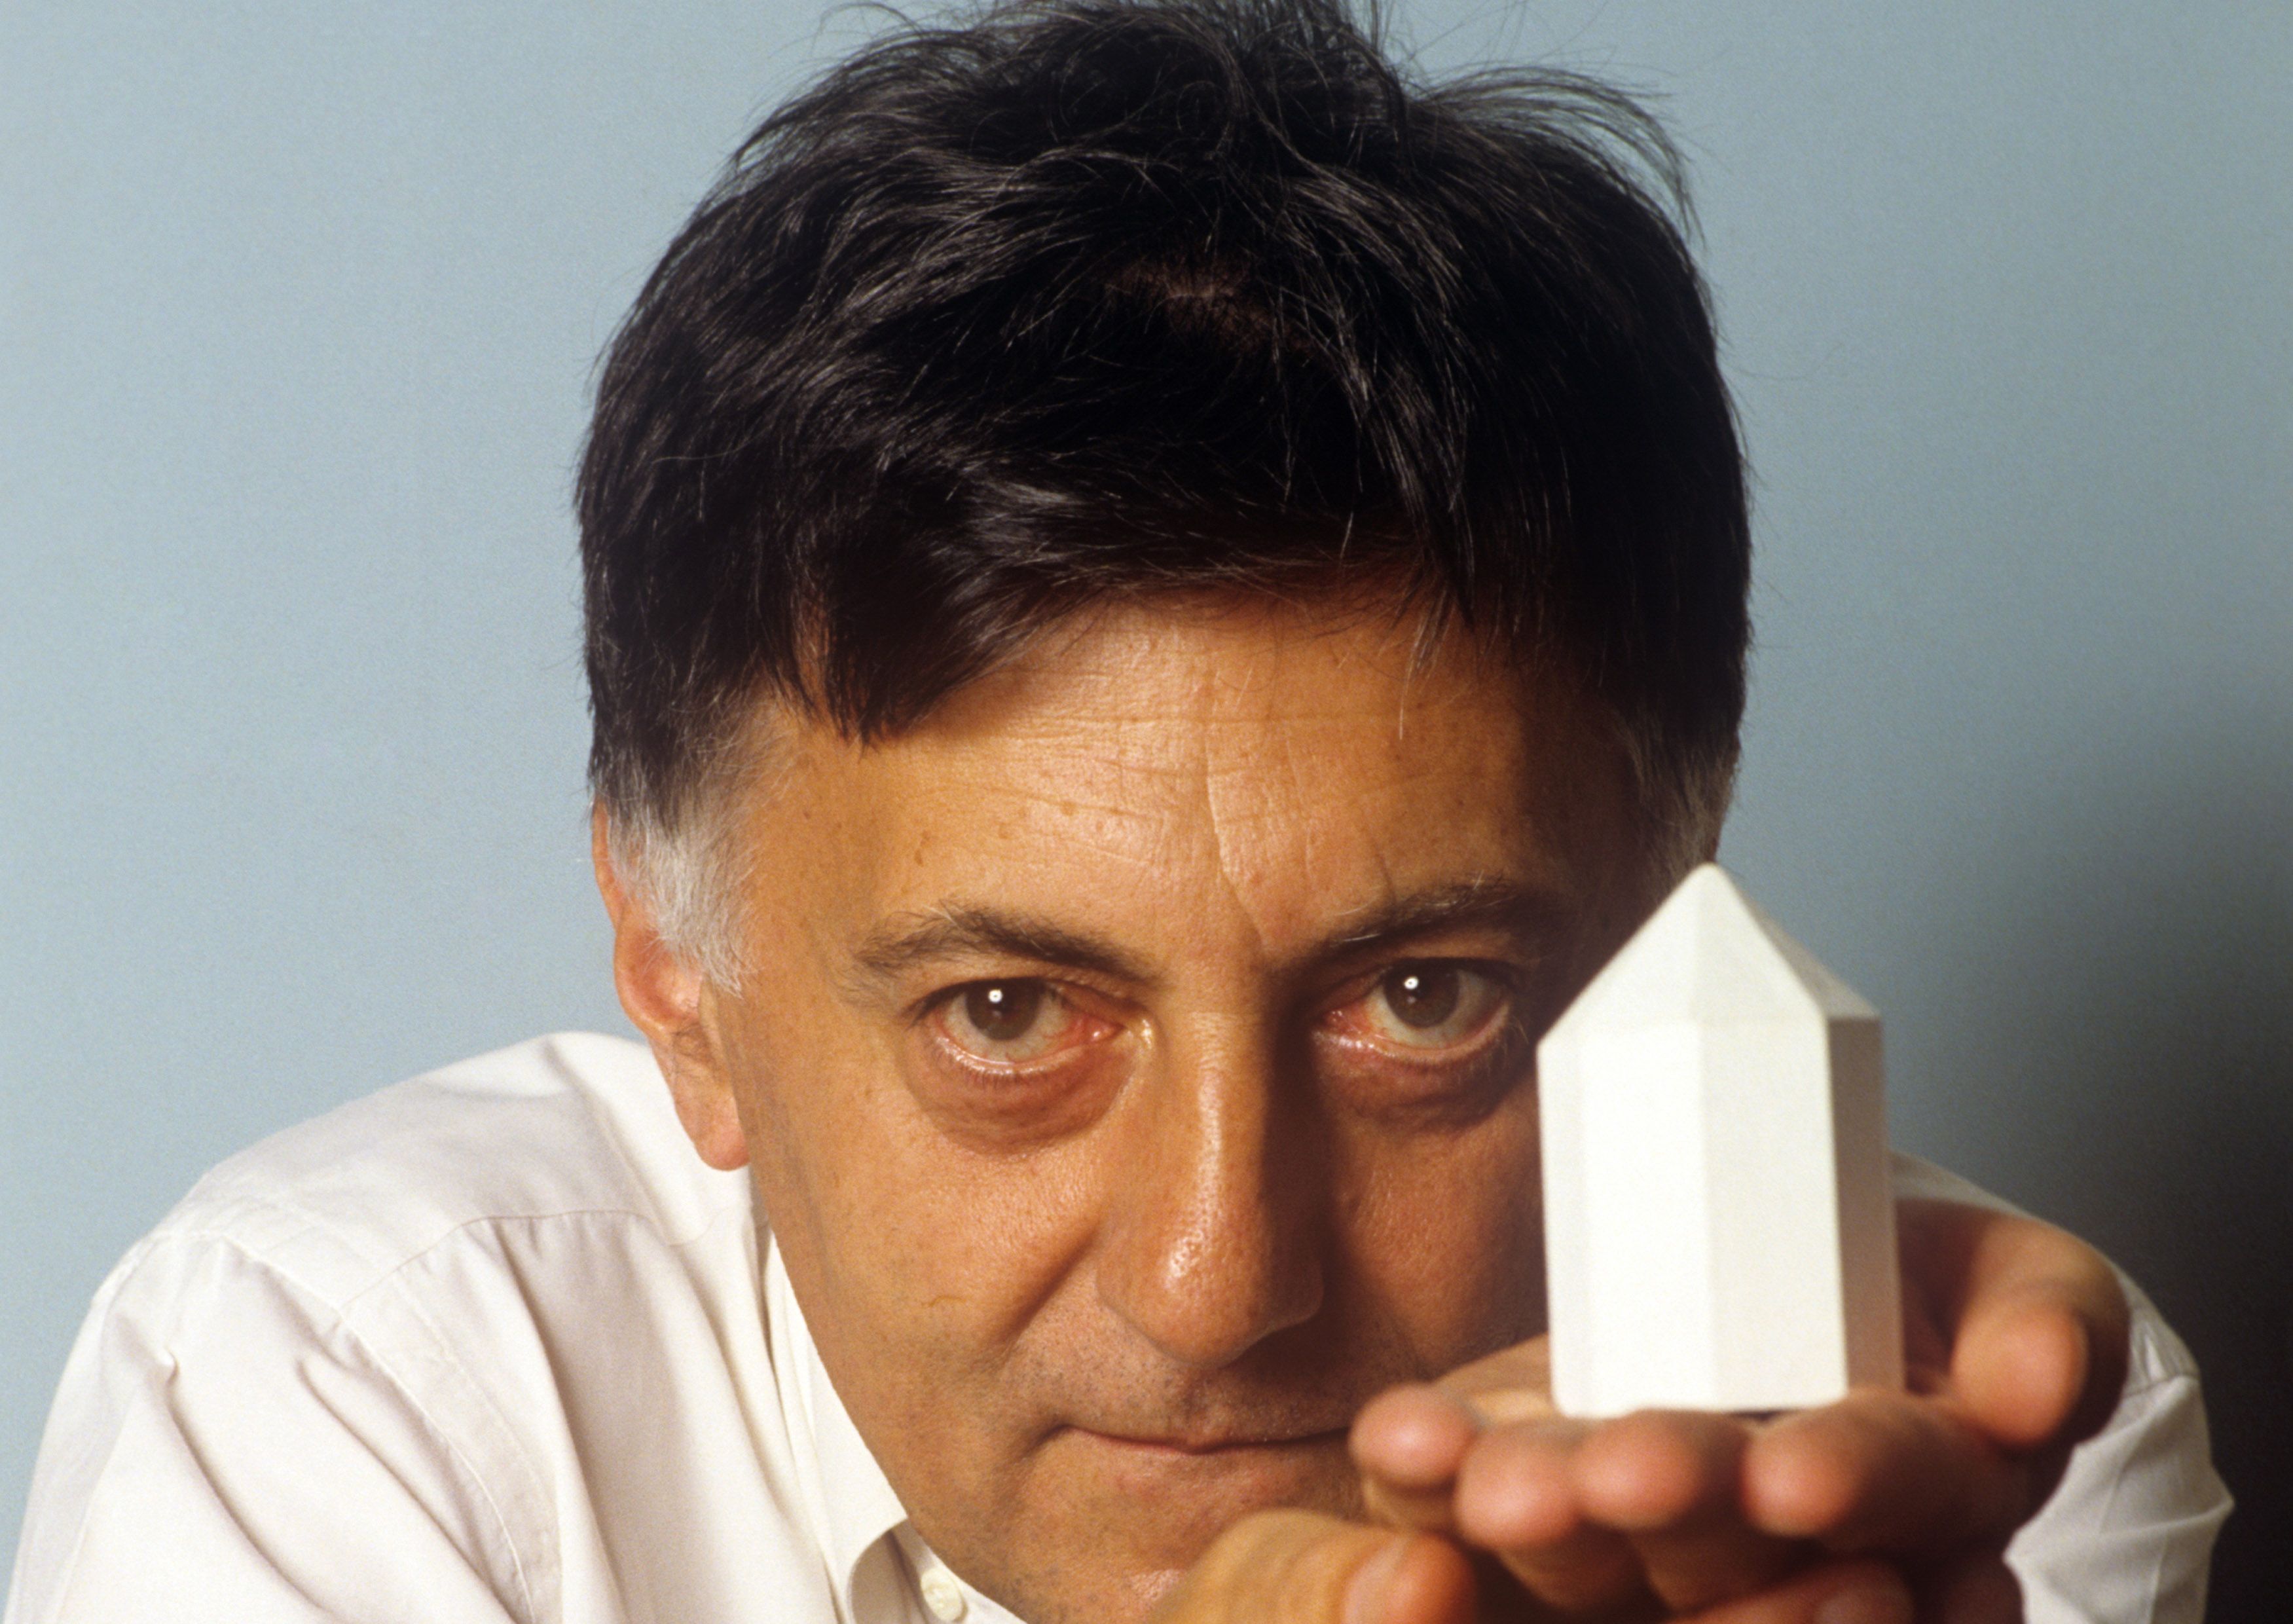 snigmord Med andre ord Skråstreg Aldo Rossi, Italy's Architectural Ace and Doyen of Design